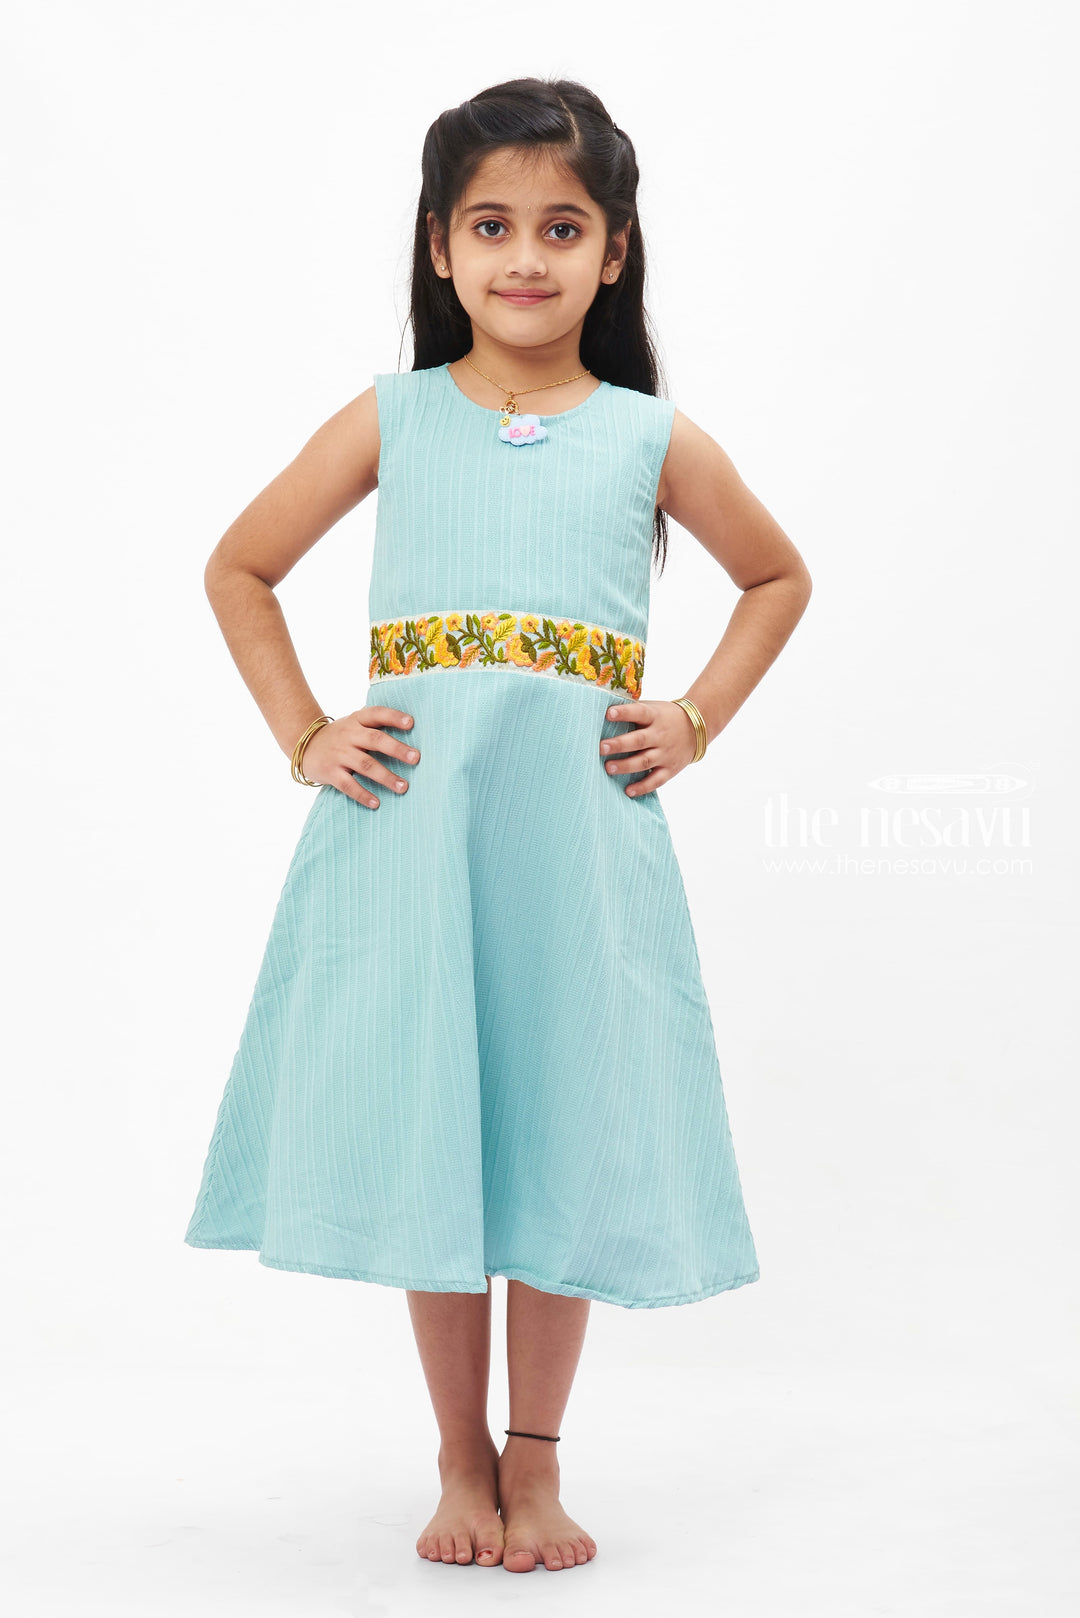 The Nesavu Girls Fancy Frock Blue Dream Pleated Frock: Refreshing Teal with Floral Accent for Girls Nesavu 18 (2Y) / Blue GFC1216A-18 Girls' Teal Pleated Summer Dress | Sleeveless Floral Accent Frock | The Nesavu